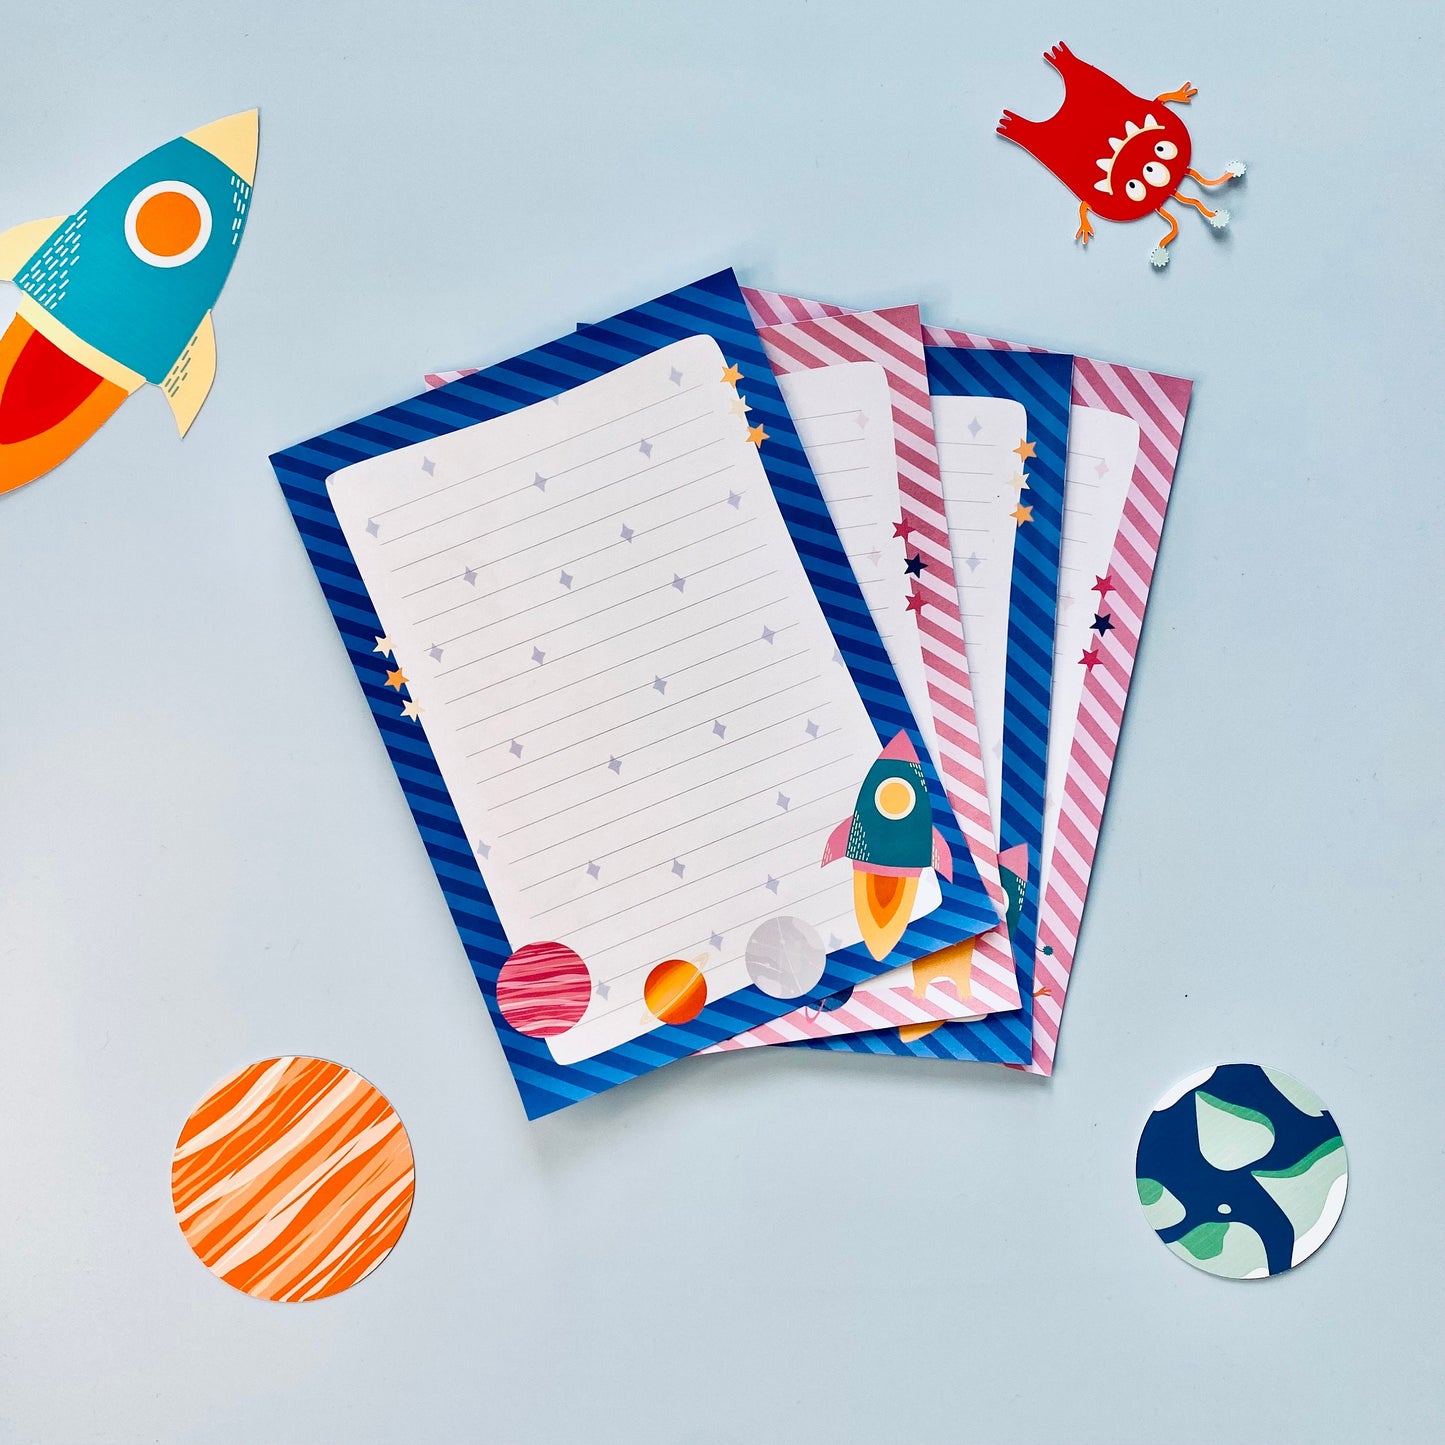 Pink space letter writing set, stationery set for children, astronaut notepaper for kids with stickers